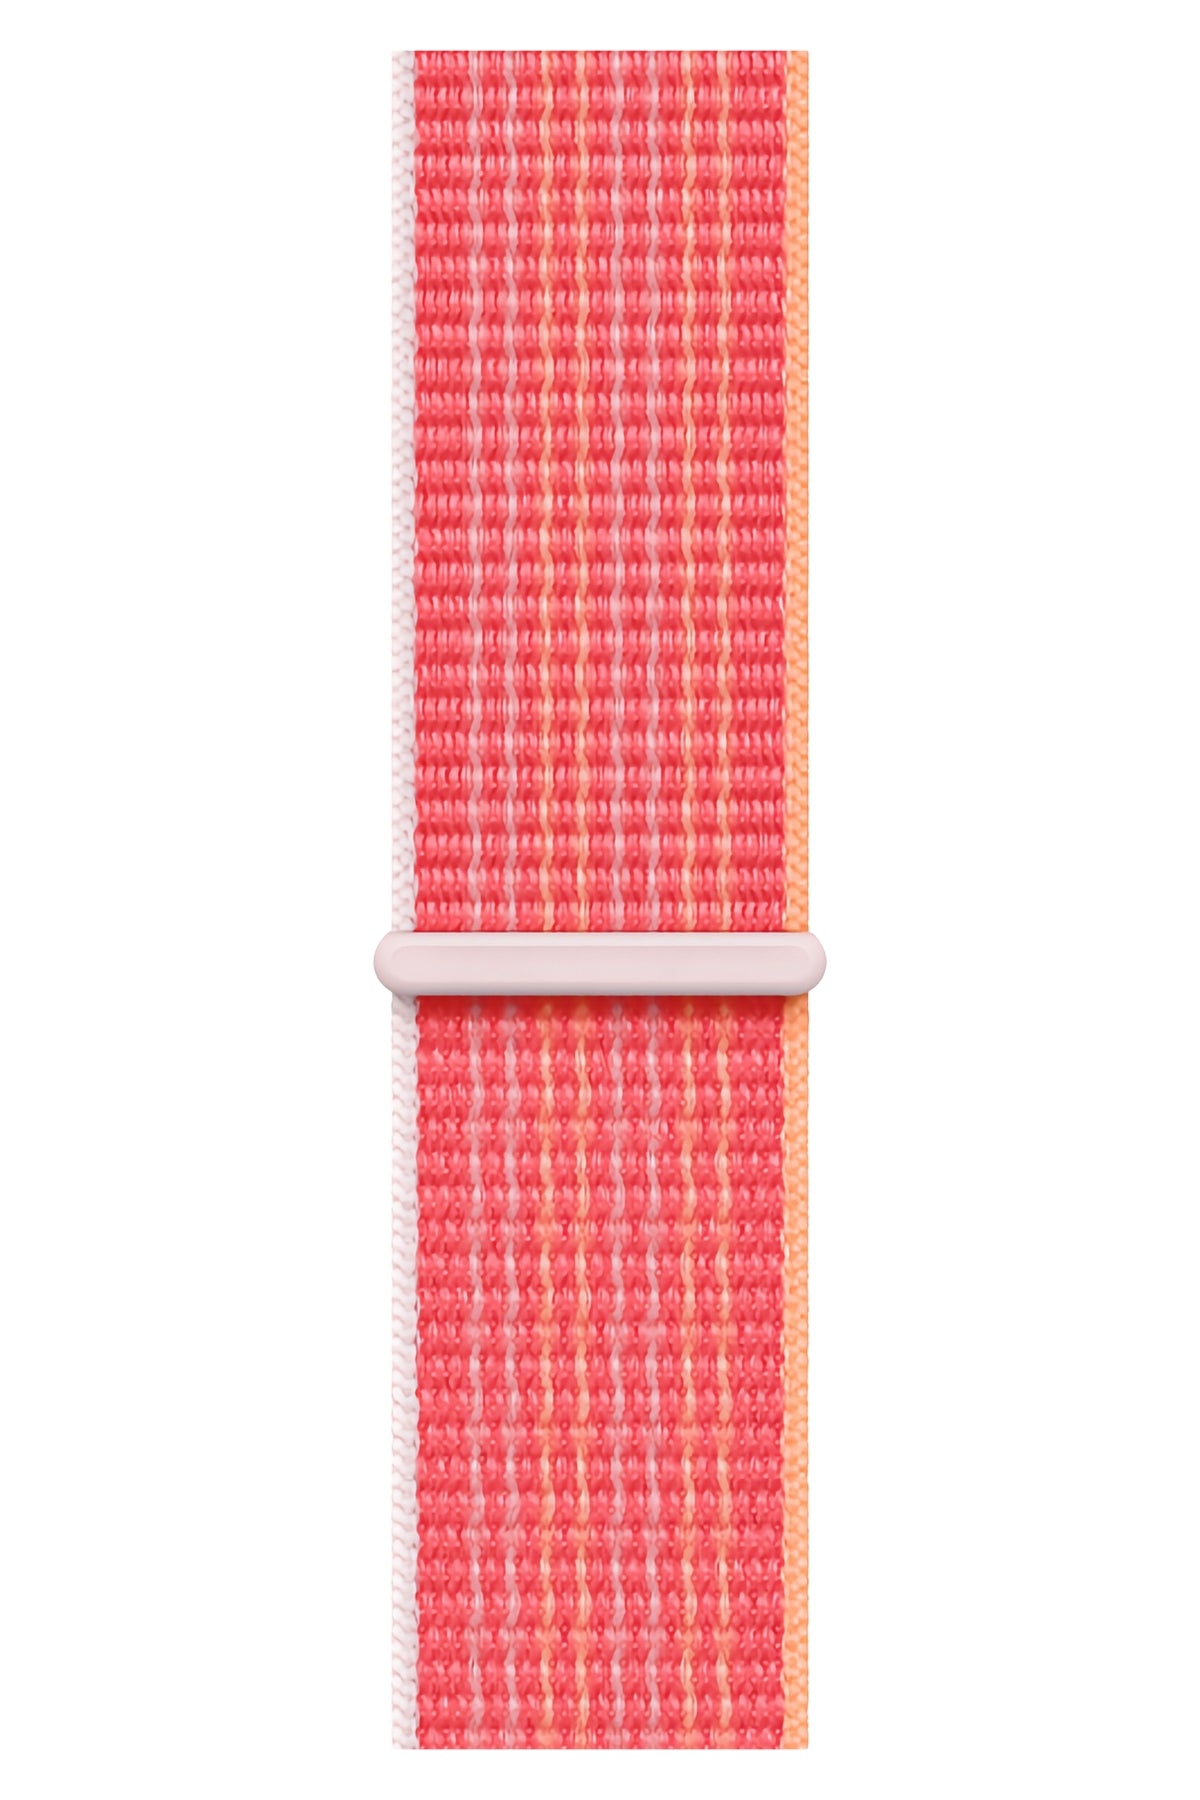 Apple Watch Compatible Sport Loop Band Amour 